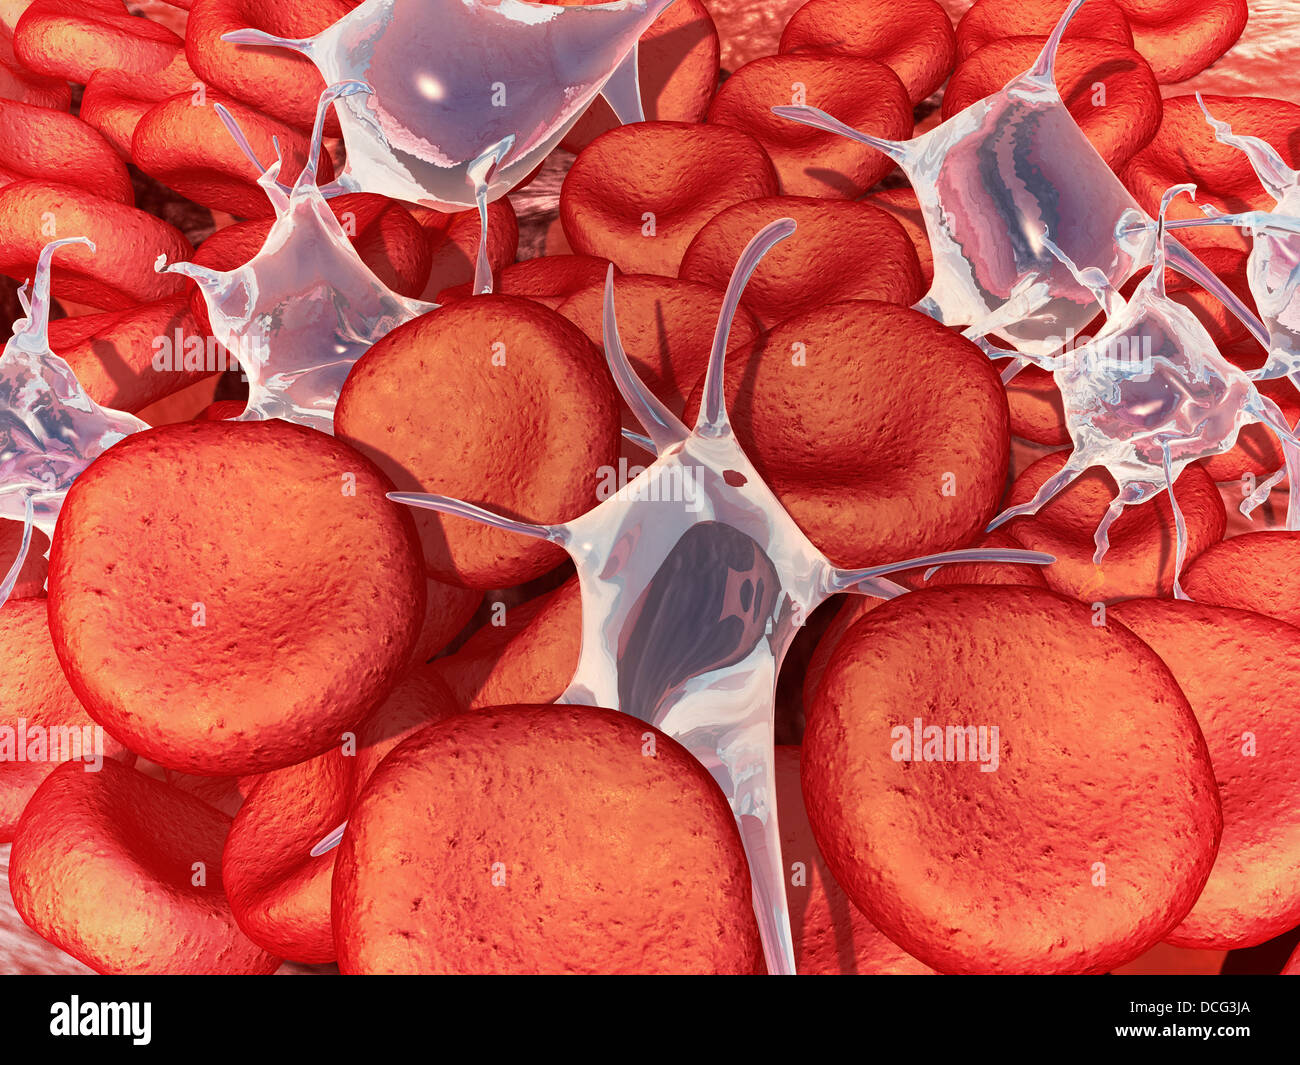 Conceptual image of red blood cells with platelets. Stock Photo